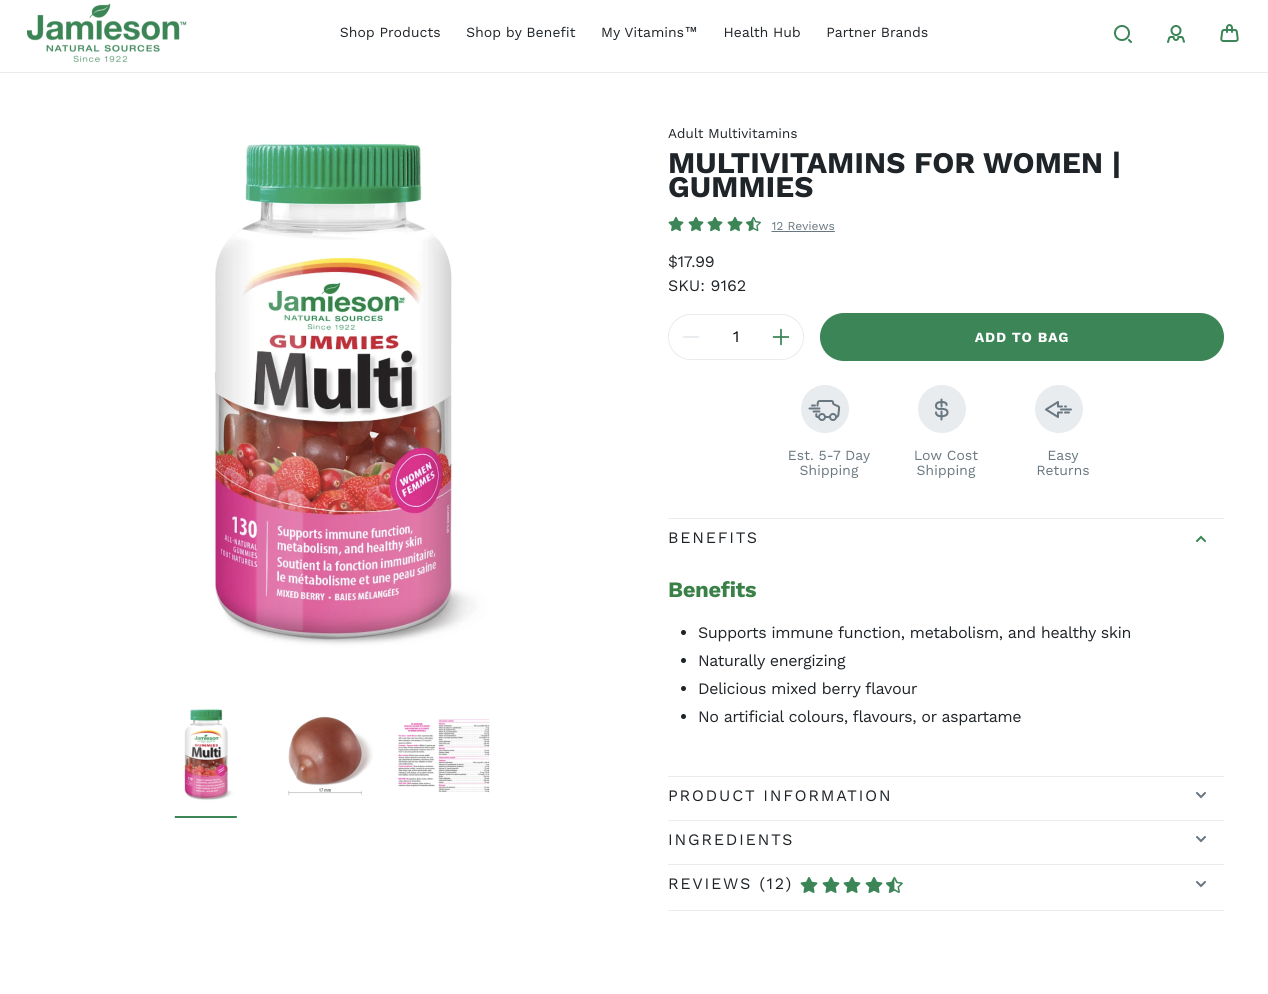 Multivitamins for women with ingredients list and reviews.